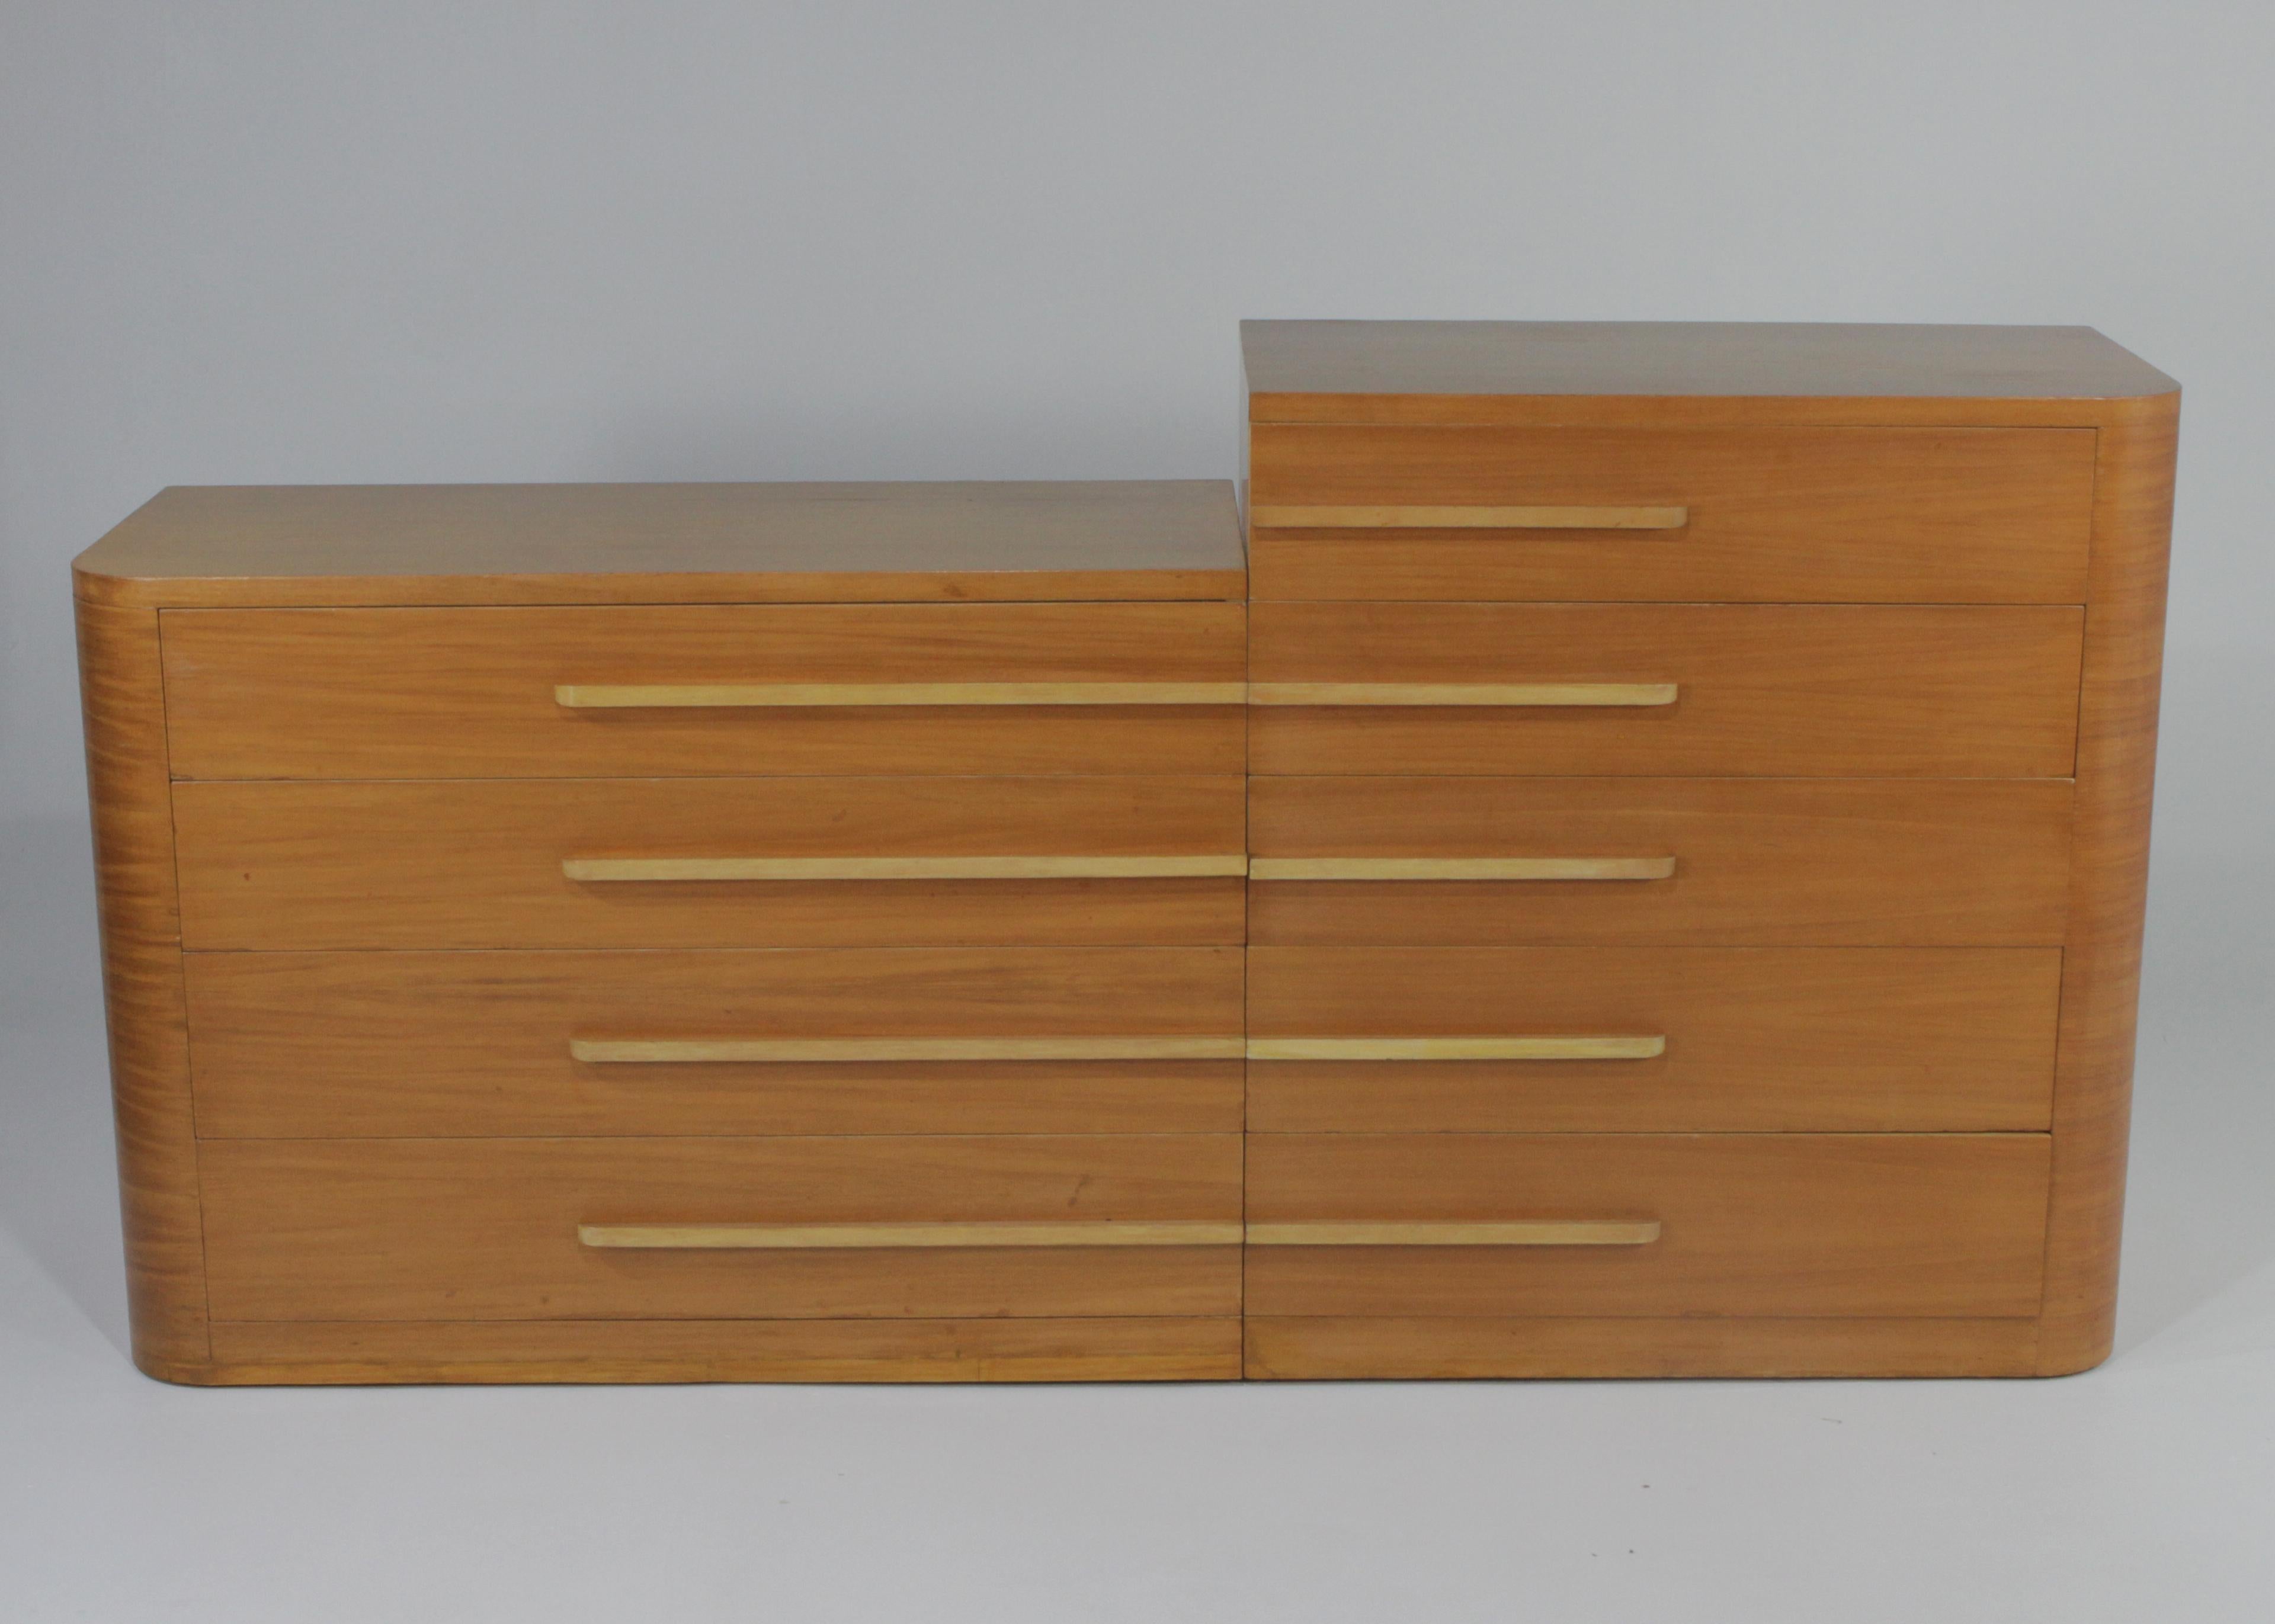 Stunning Art Deco Moderne dresser 2-piece set designed by Donald Deskey for Widdicomb. Unmarked. Sleek, long horizontal lines in two streamline forms, each with one rounded end and graduated drawers with elongated lacquered wood pulls. The wood